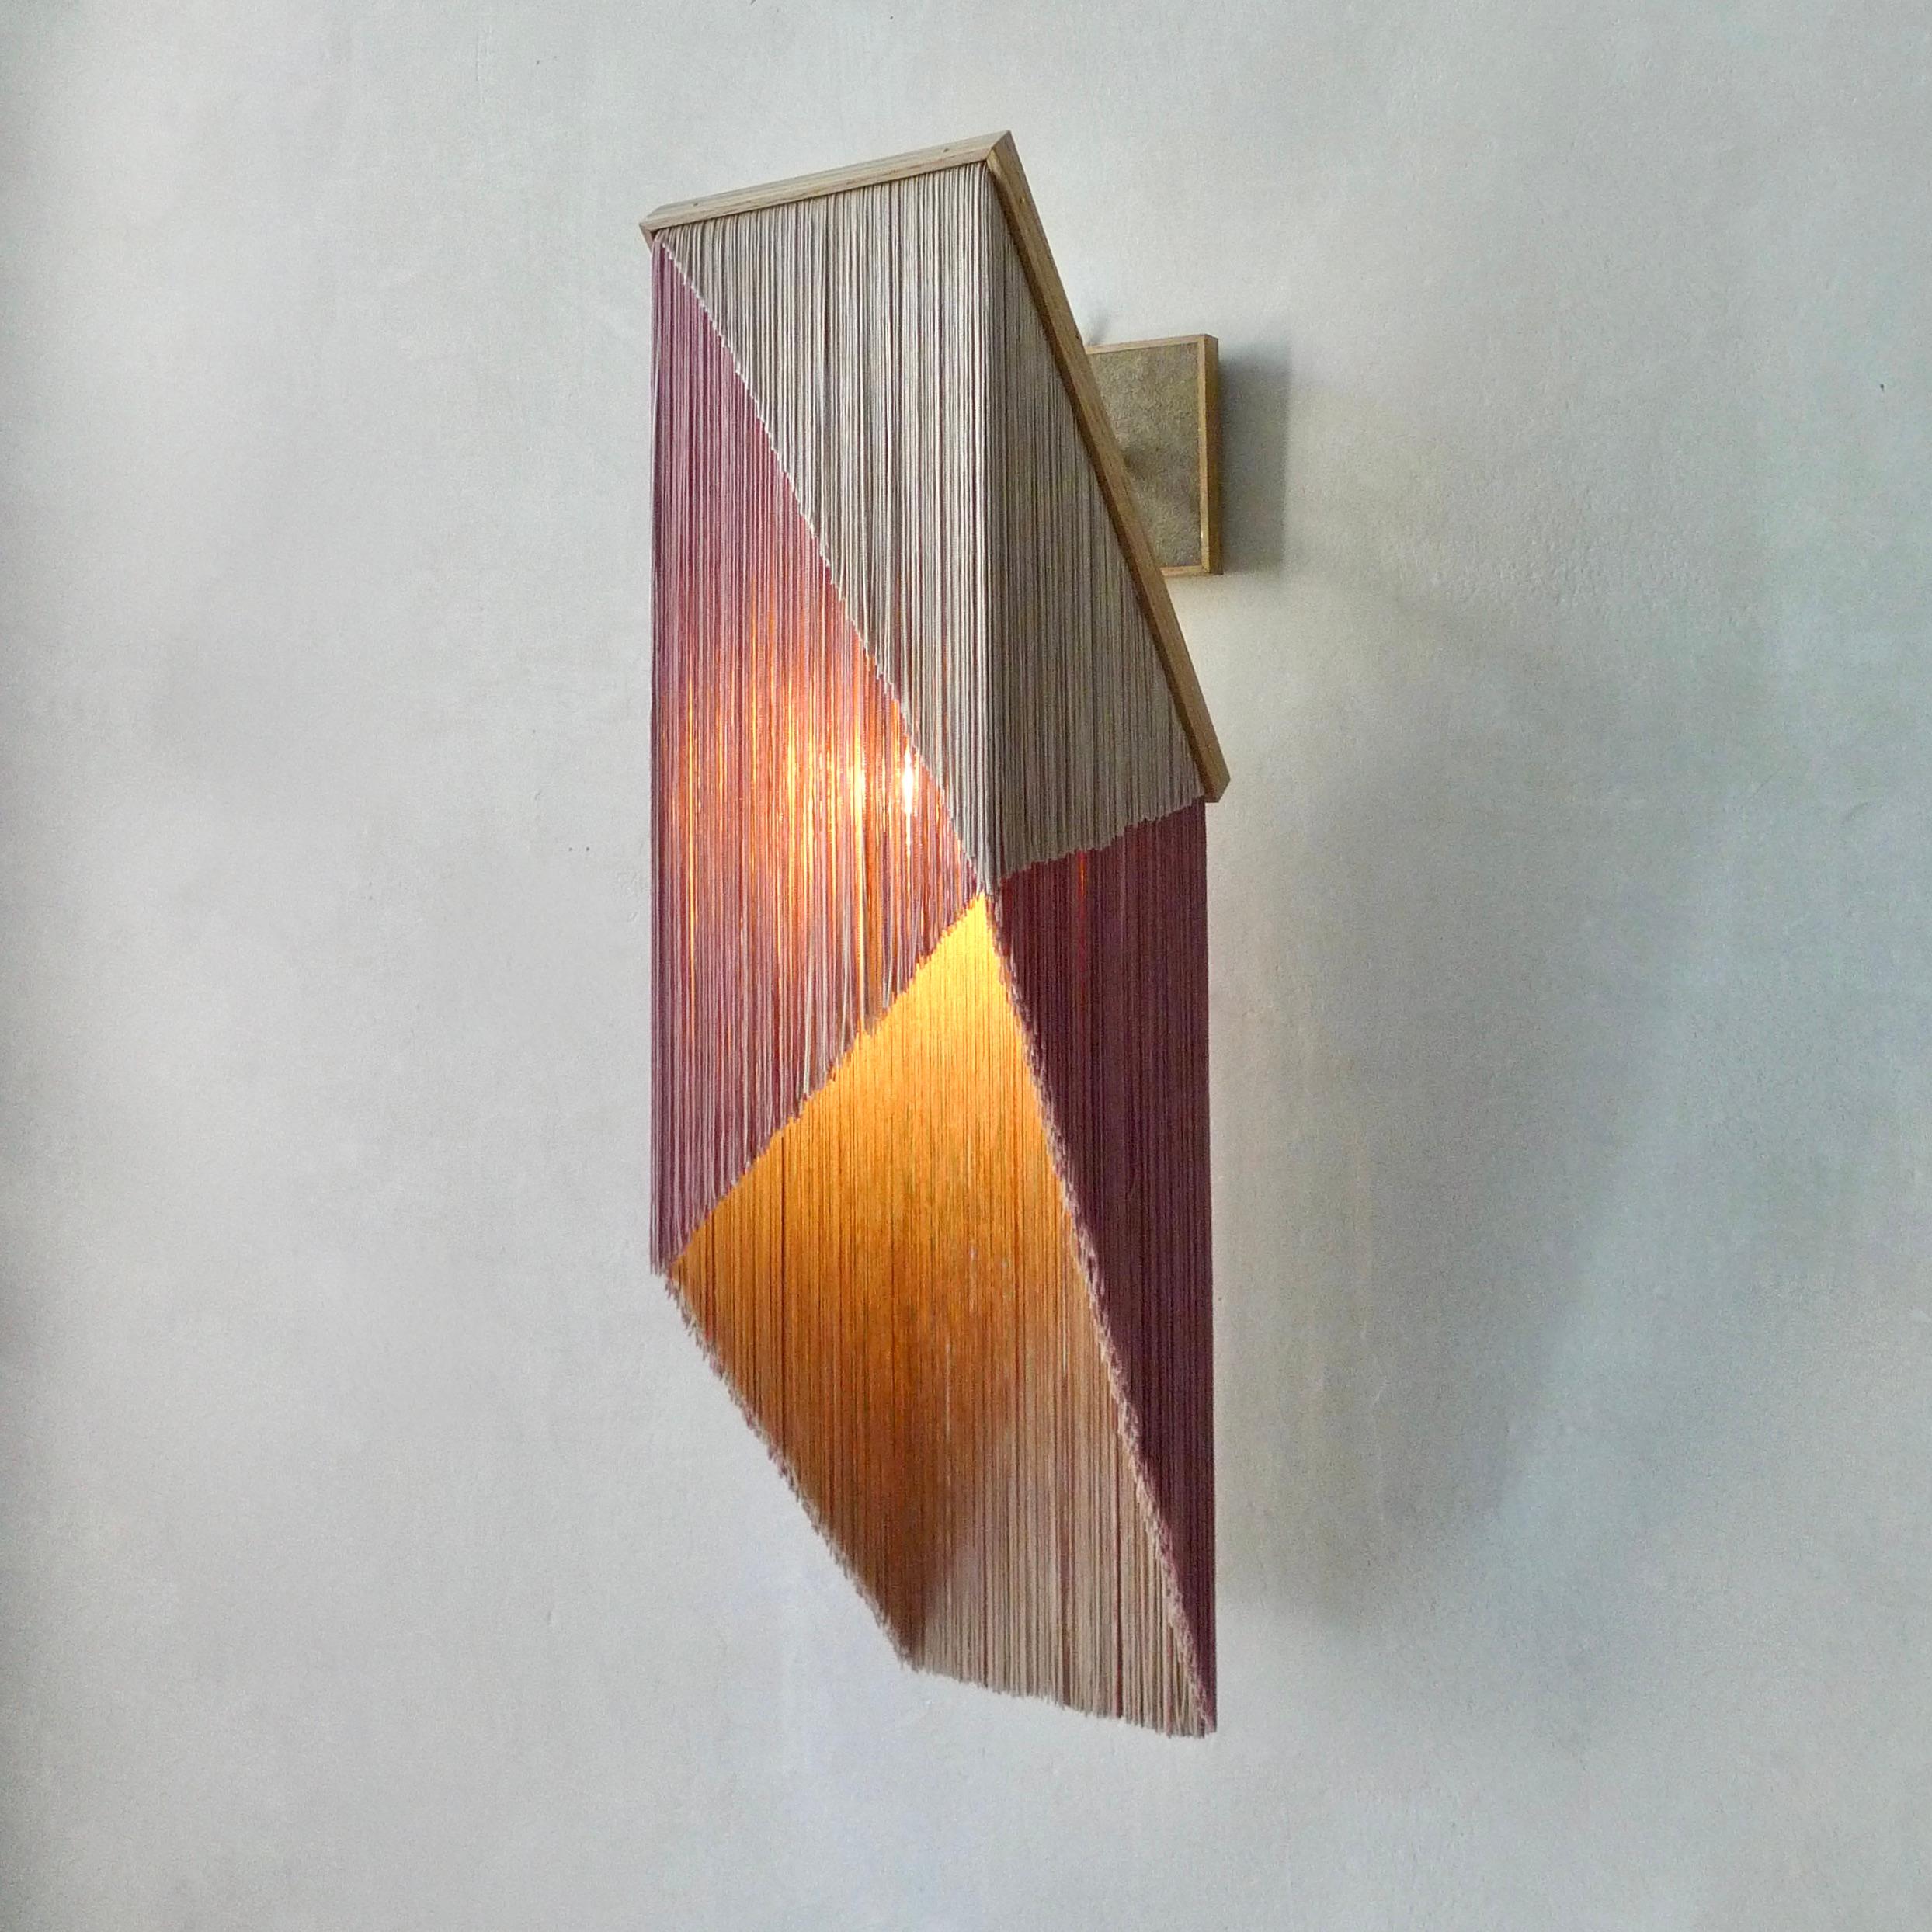 No. 28 Wall Lamp by Sander Bottinga
Dimensions: H 46 - 70 x W 31 x D 22 - 30 cm
Materials: Brass, Wood, Leather, Viscose Fringes
Variations available.

Handmade in brass, wood, leather and 3 double layered viscose fringes in
geometric cut and